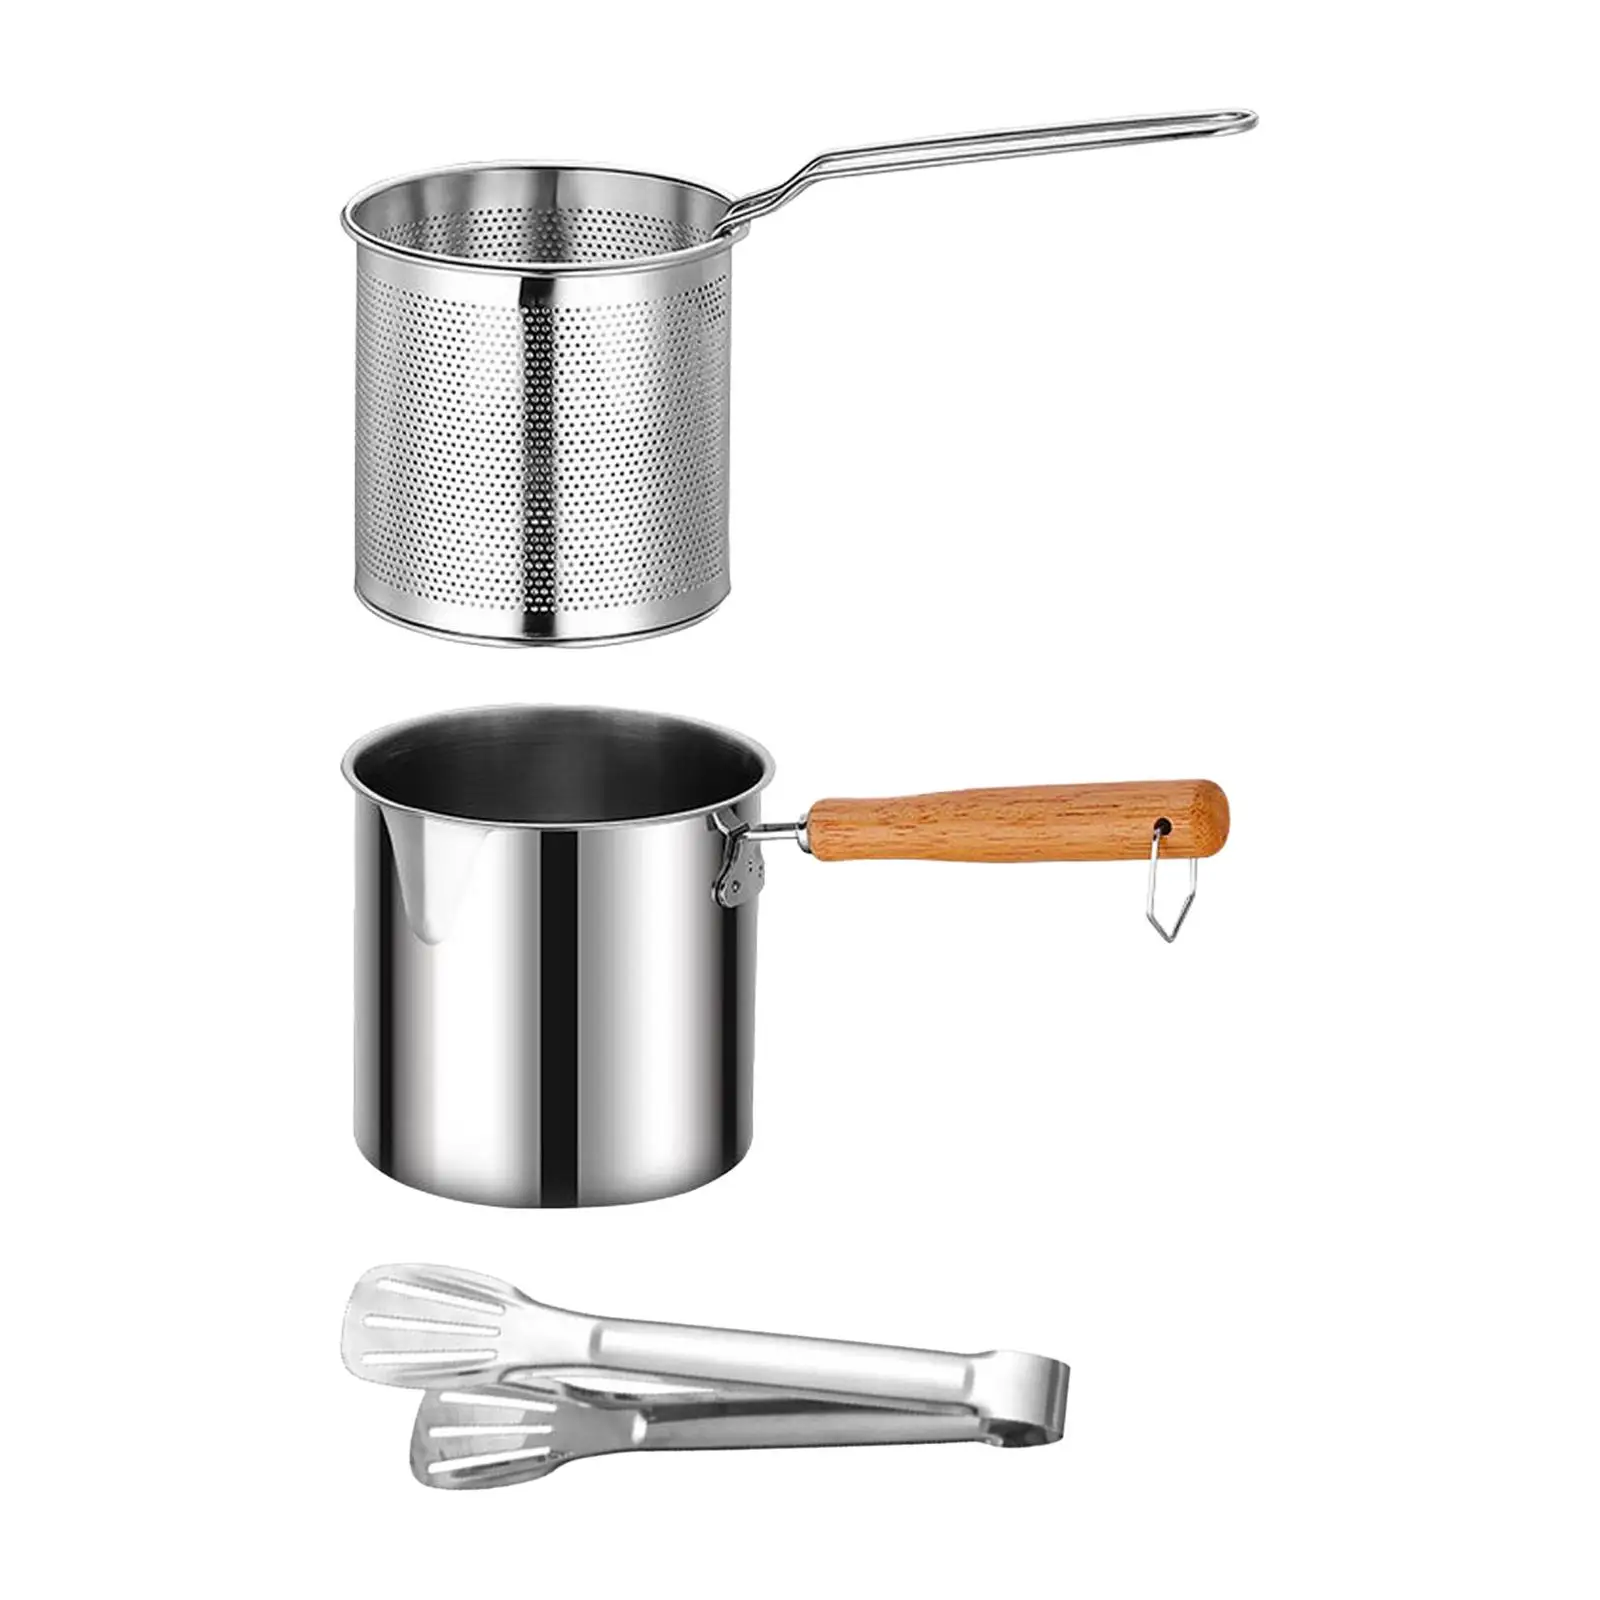 Deep Frying Pot with Lids Deep Fryers Frying Pot Kitchen Cooking Tools Frying Basket Pasta Basket for Home Outdoor Camping